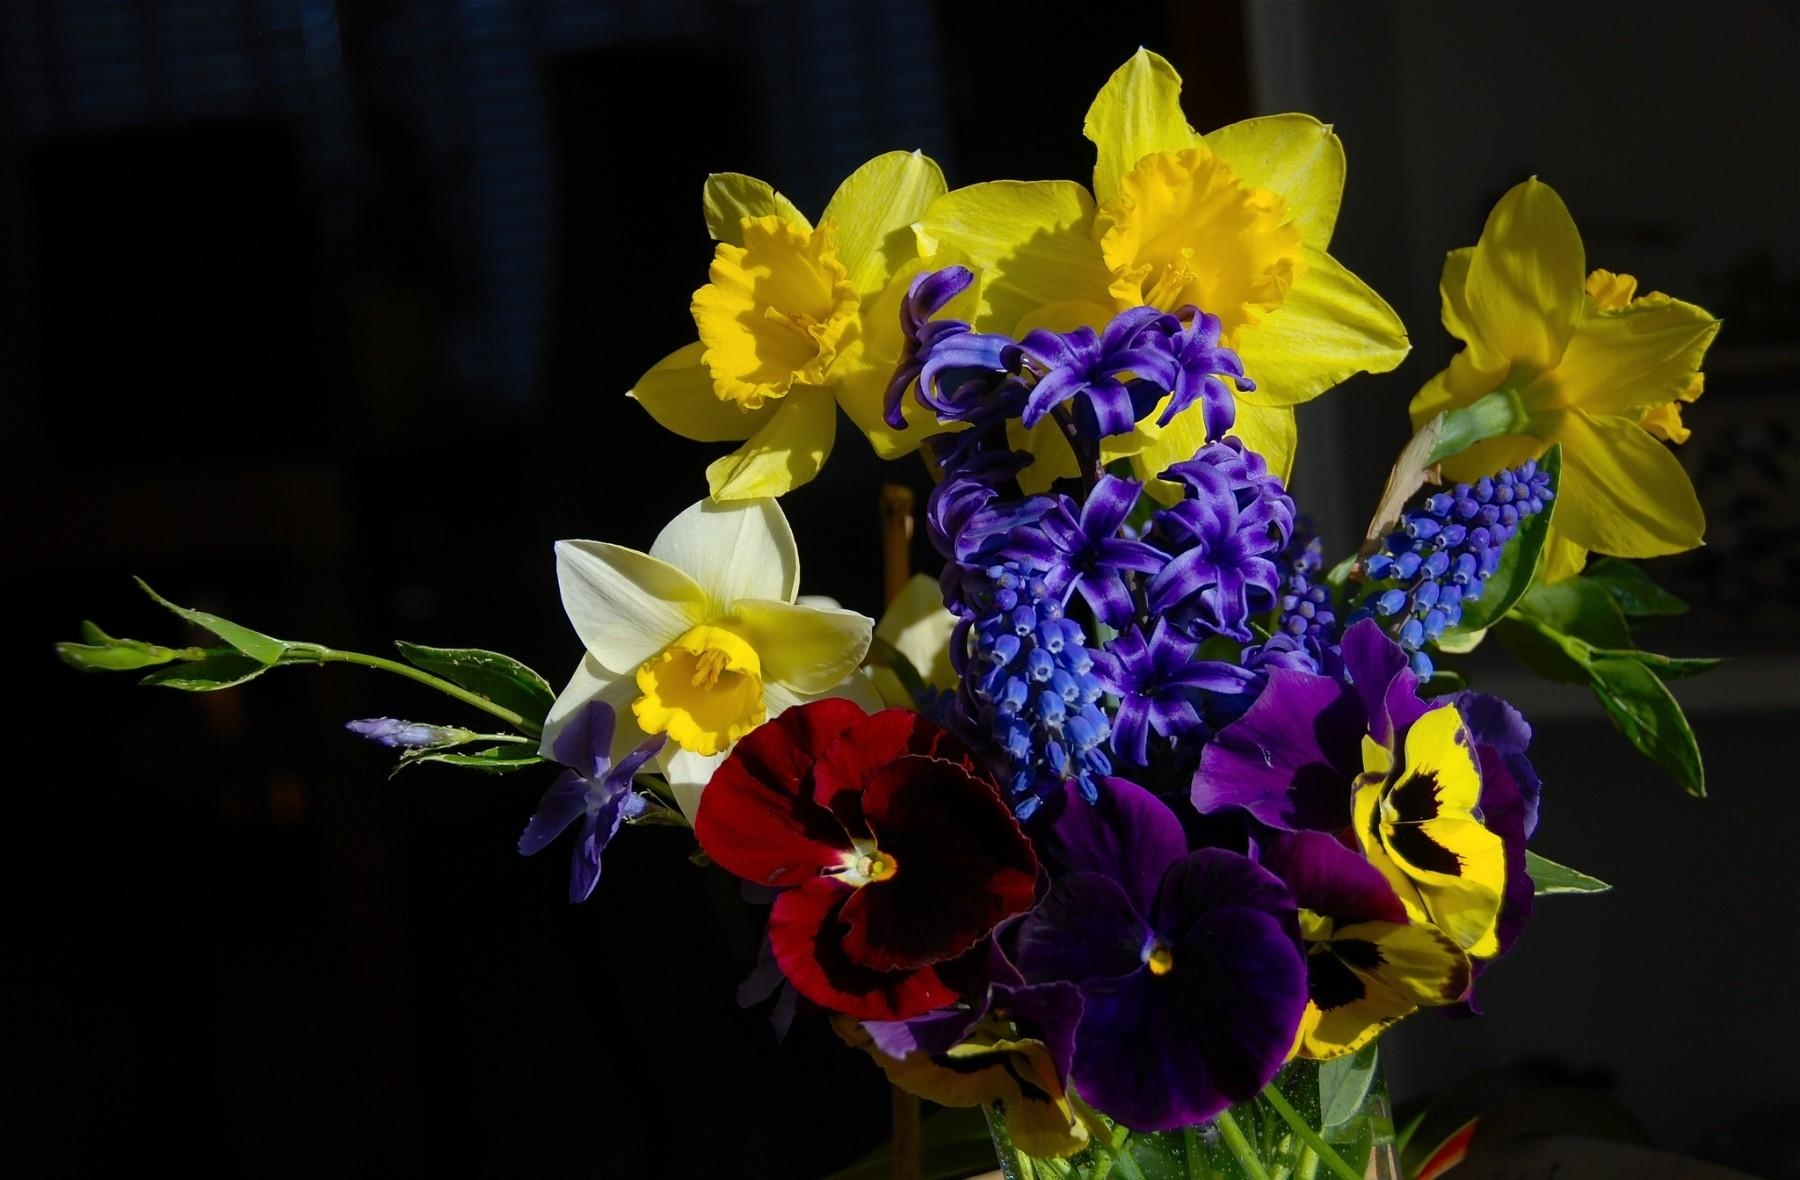 hyacinth, flowers, greens, pansies, narcissussi, bouquet, composition, muscari, muskari